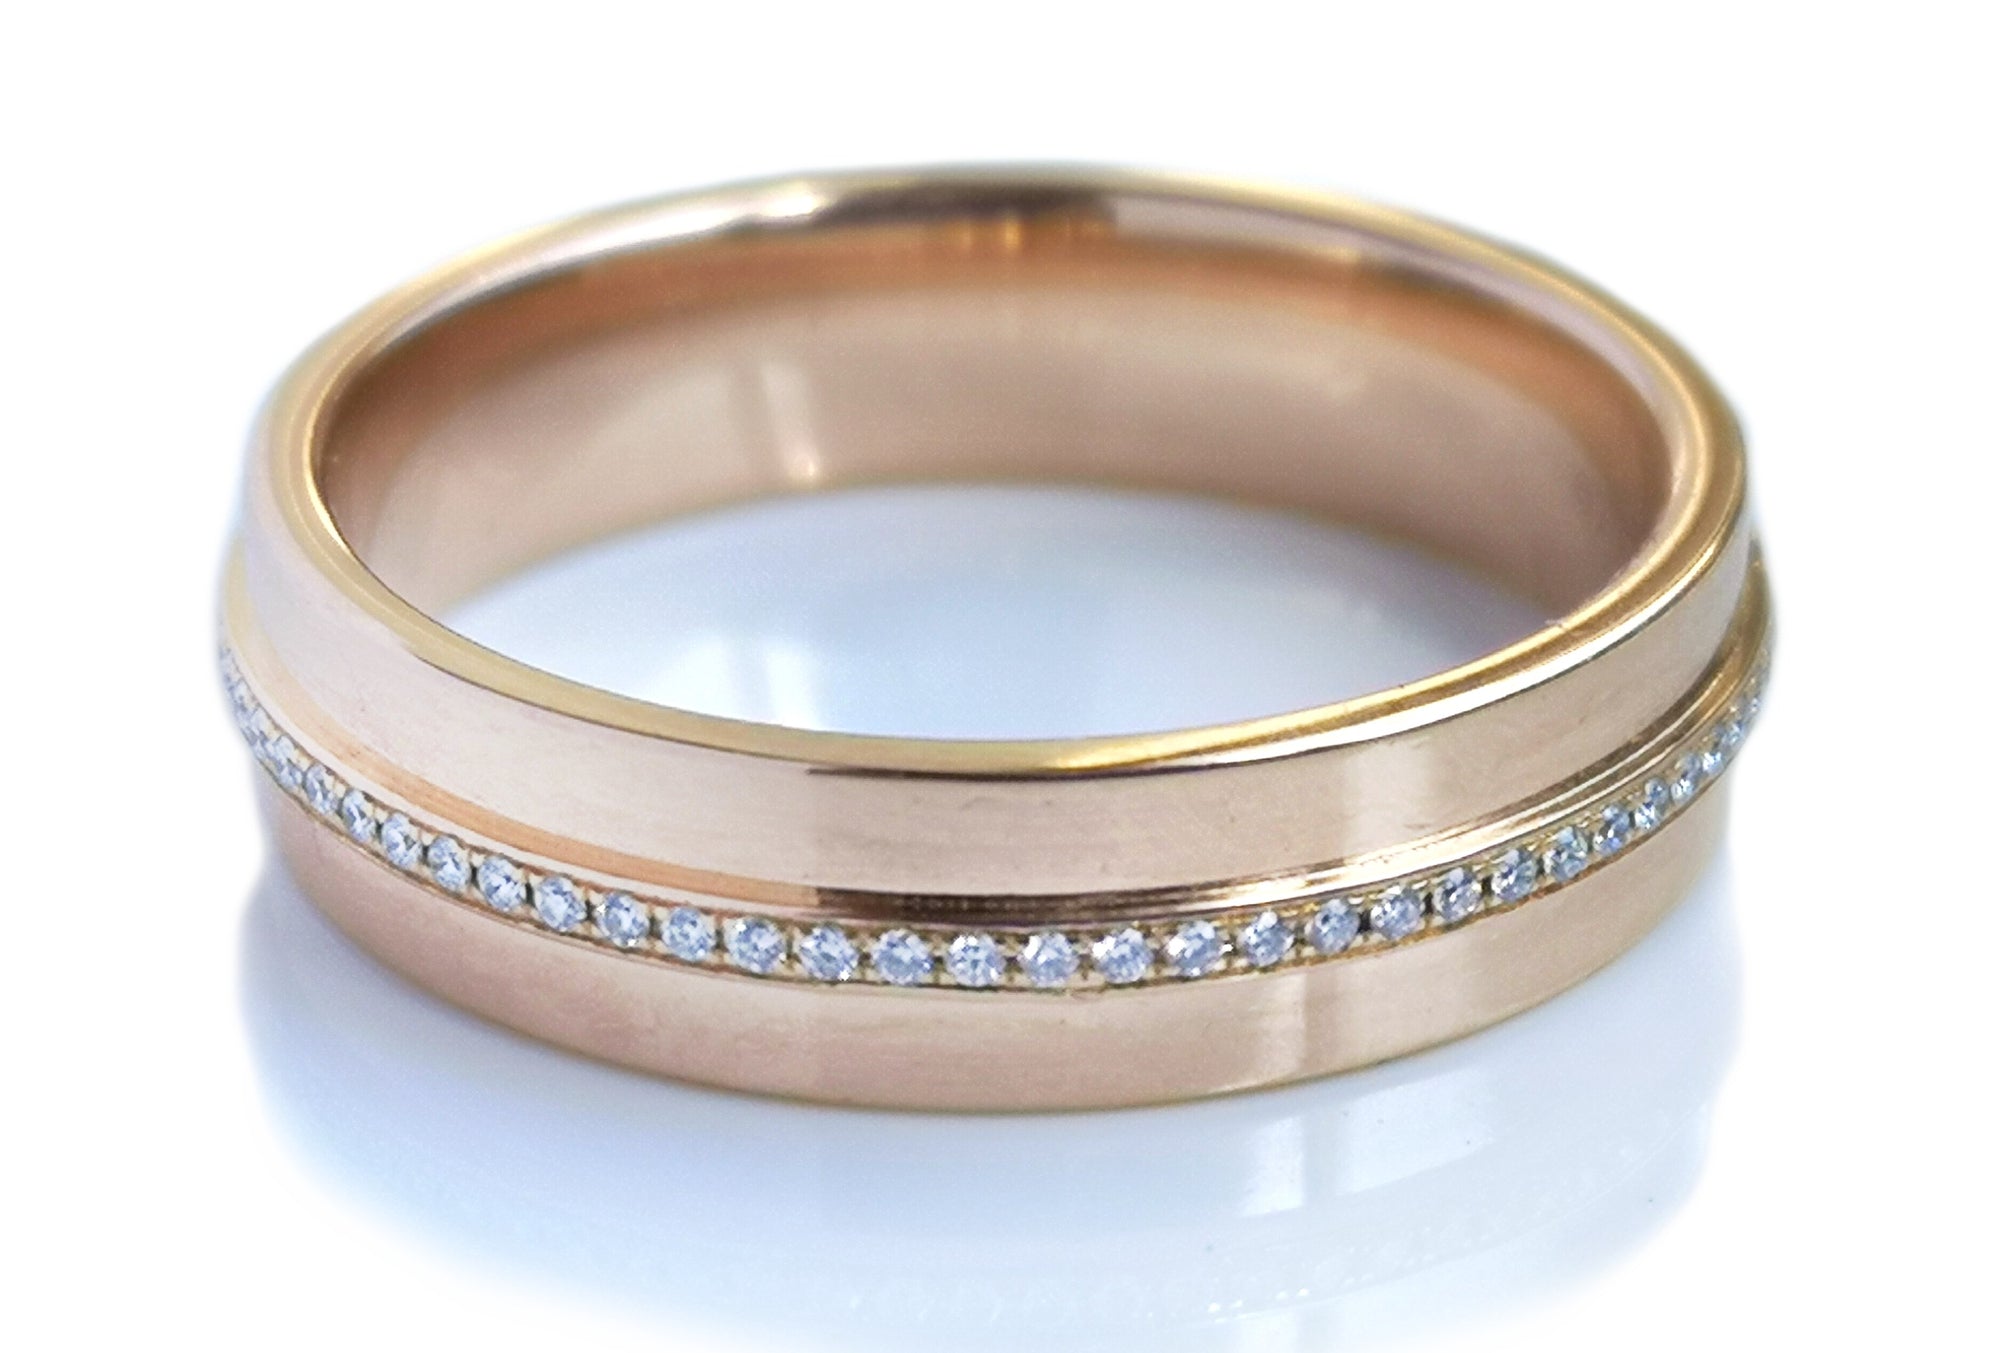 Tiffany & Co. T Wide Diamond Ring in Rose Gold, Size T / 10